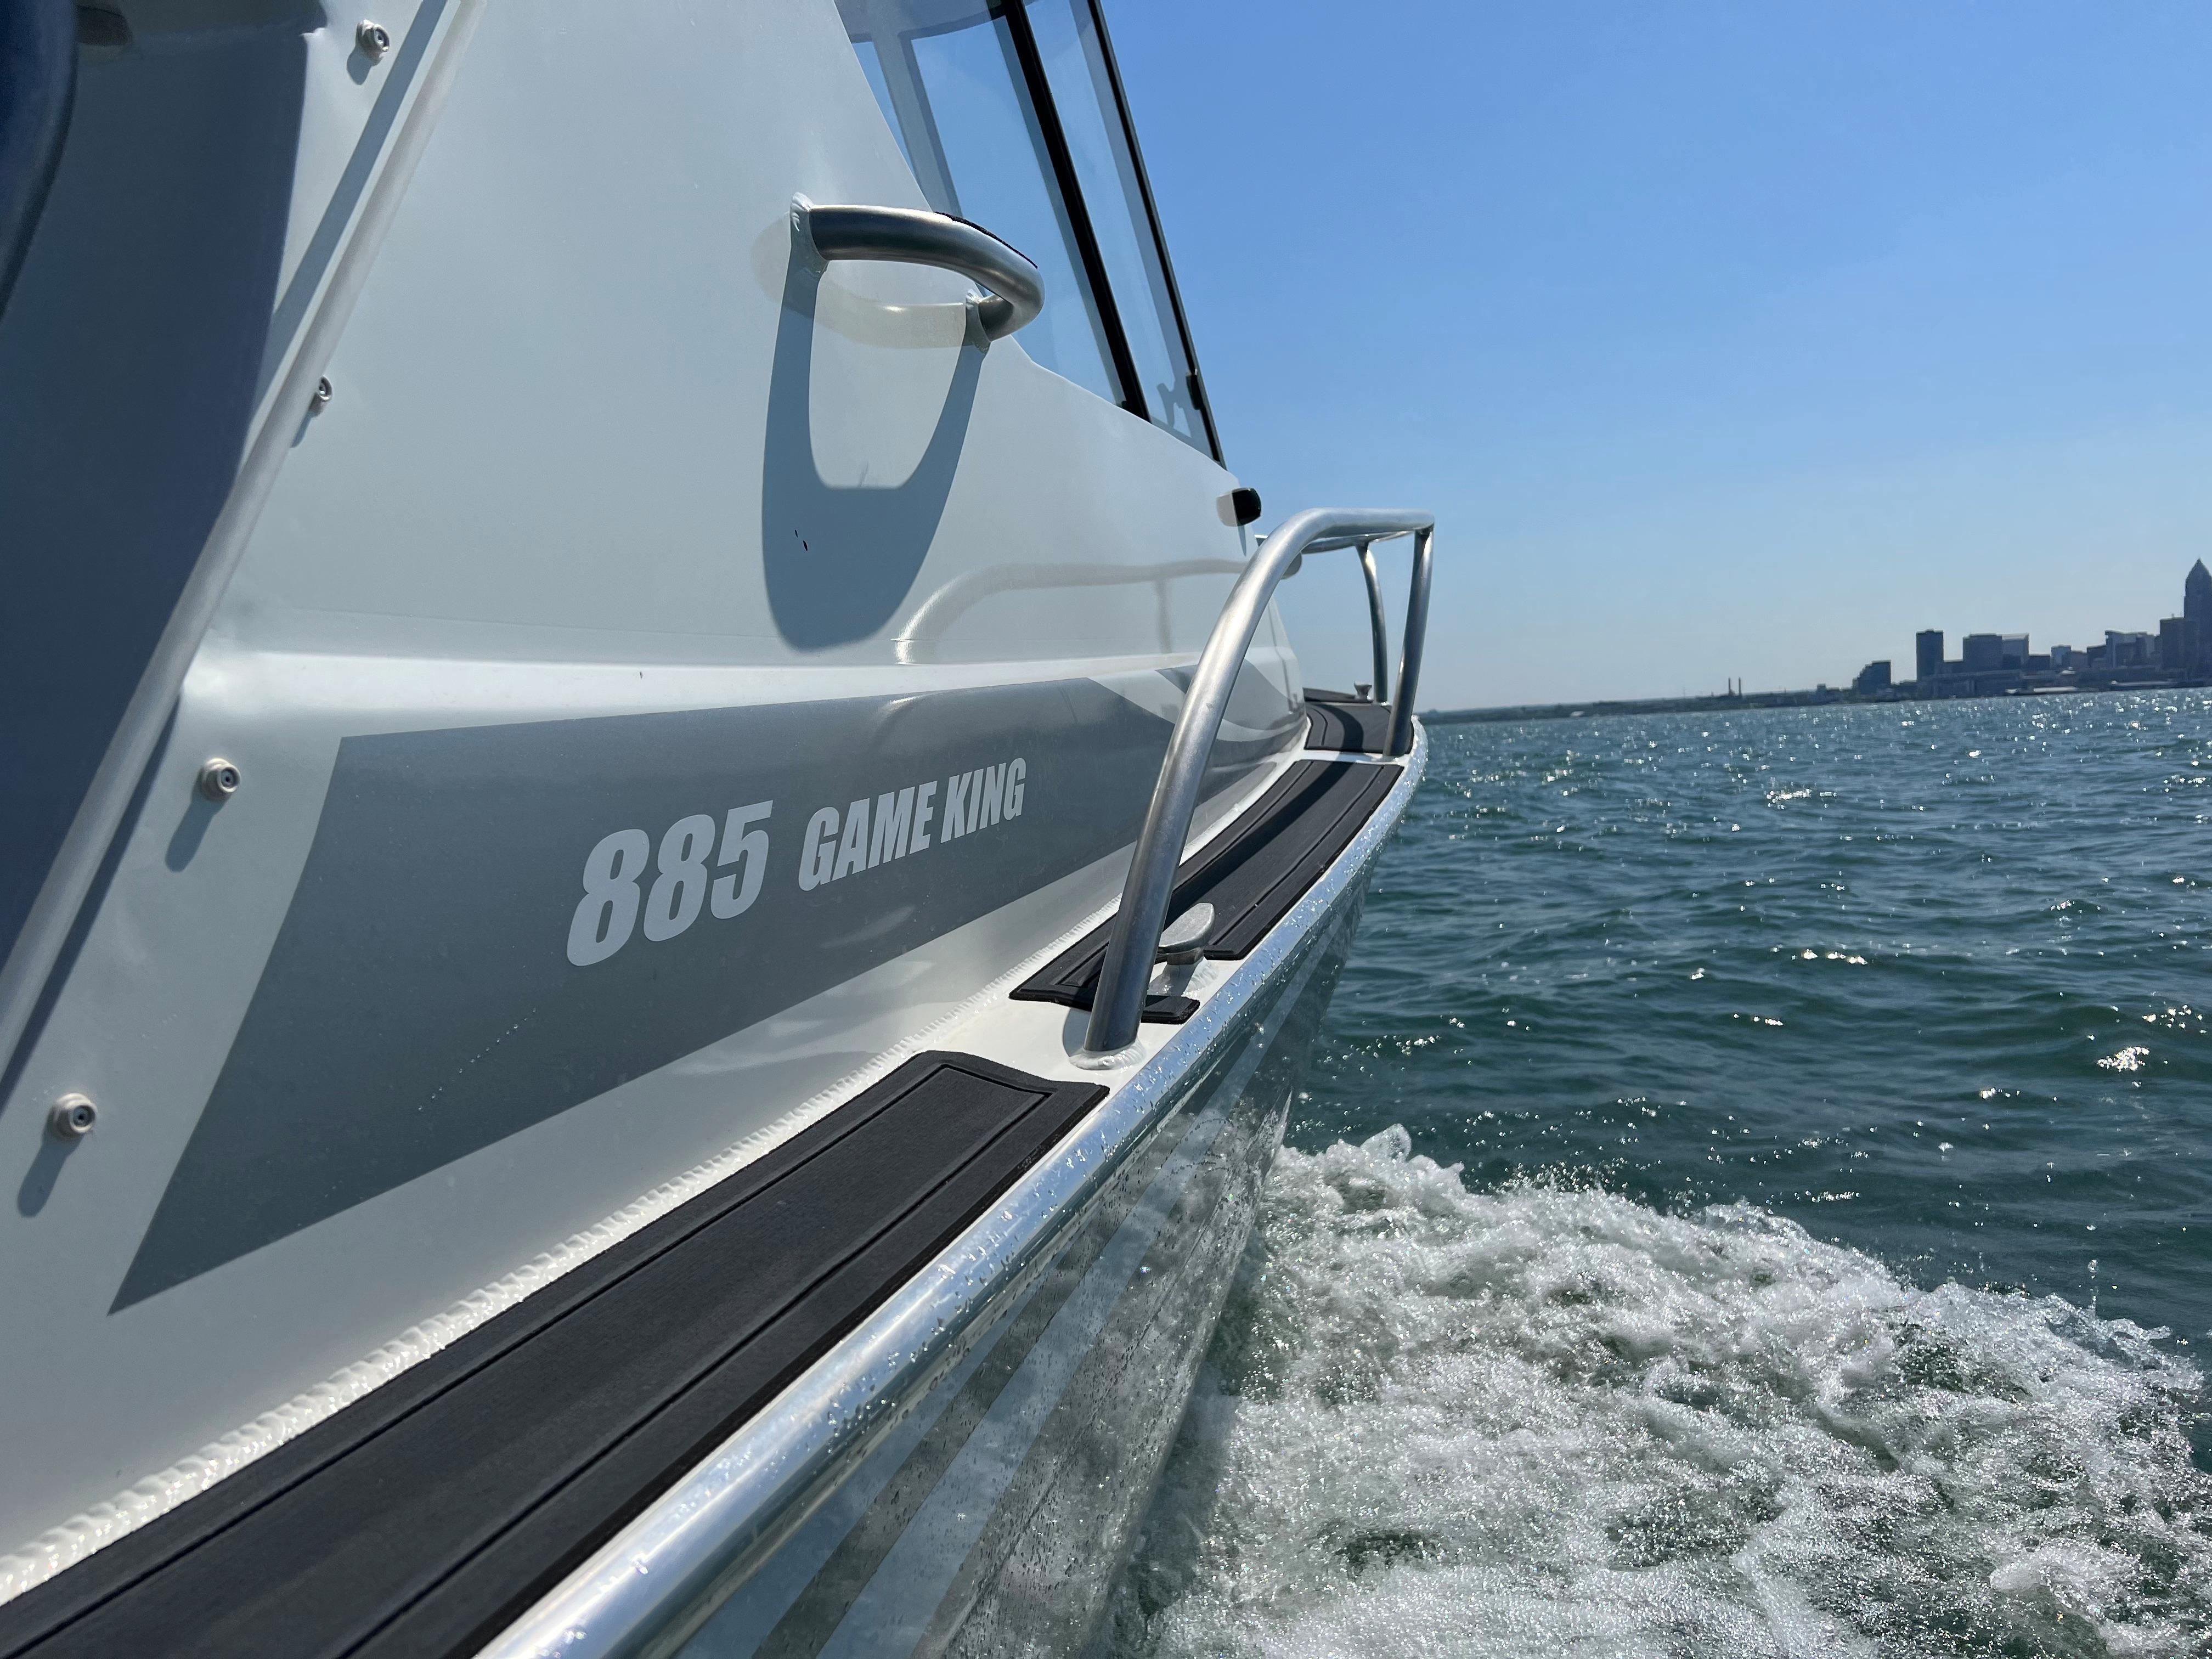 Extreme Boats 885 Game King 